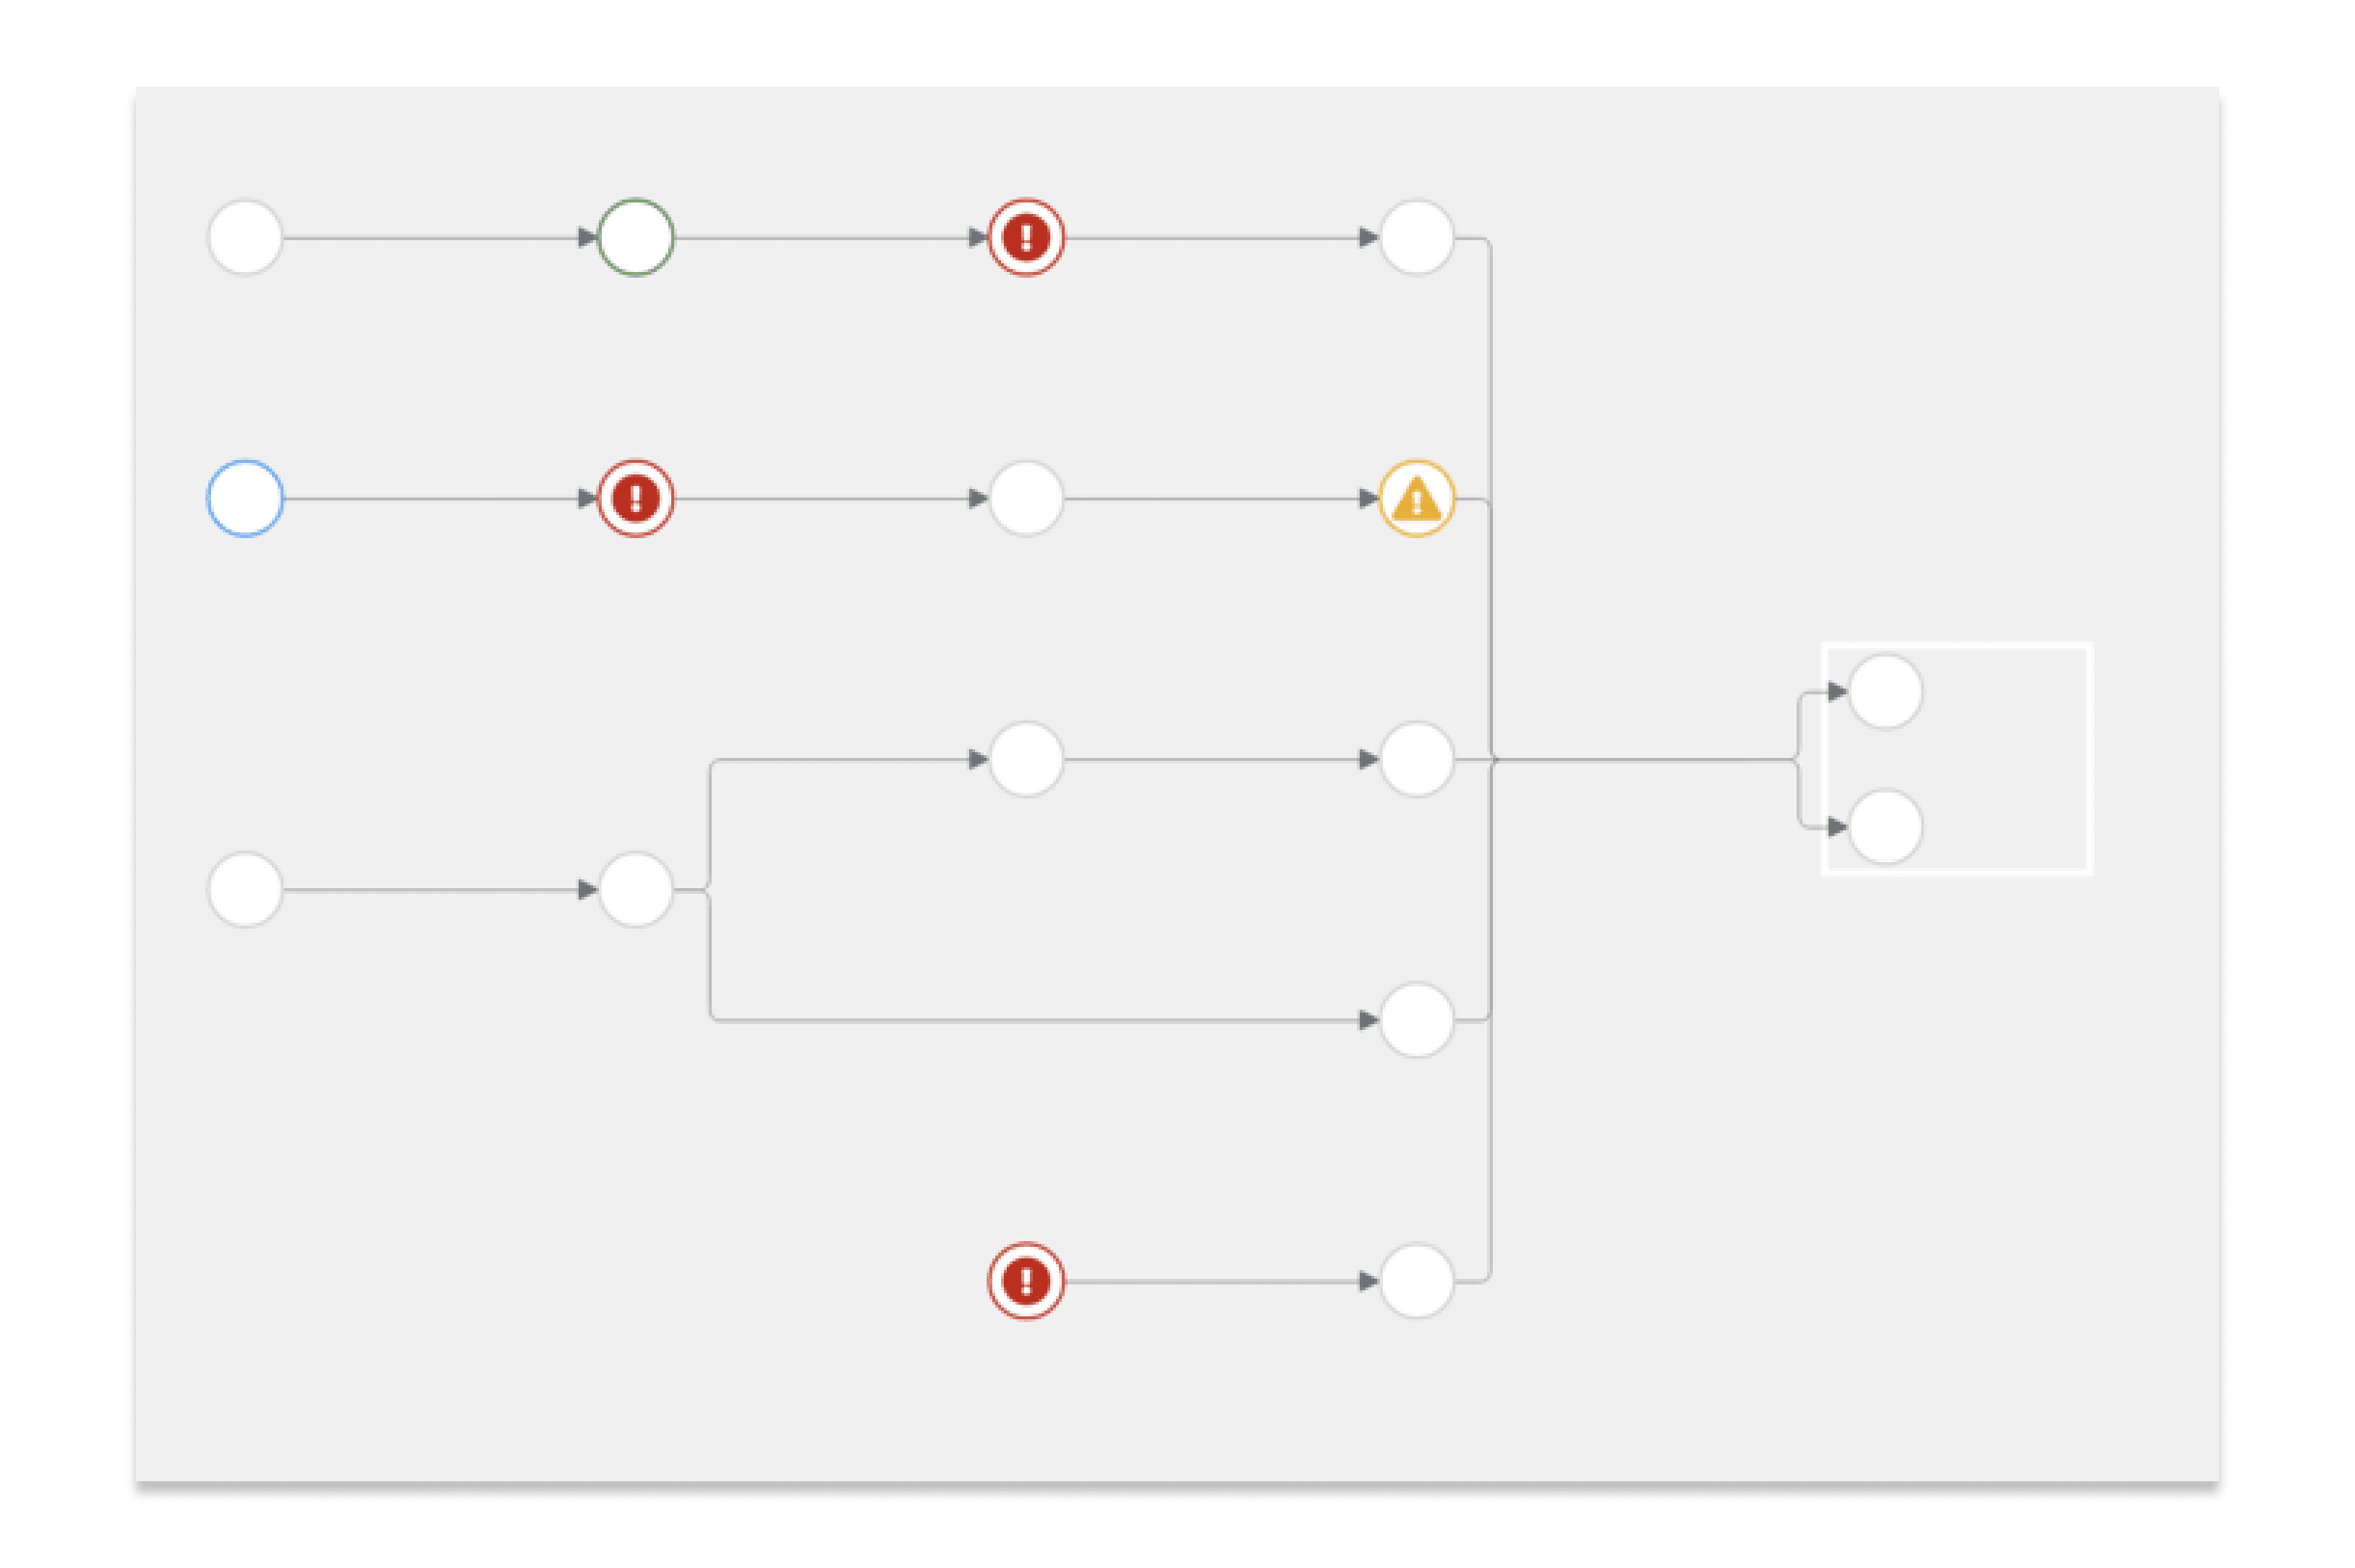 Topology pipeline with arrows between tasks.